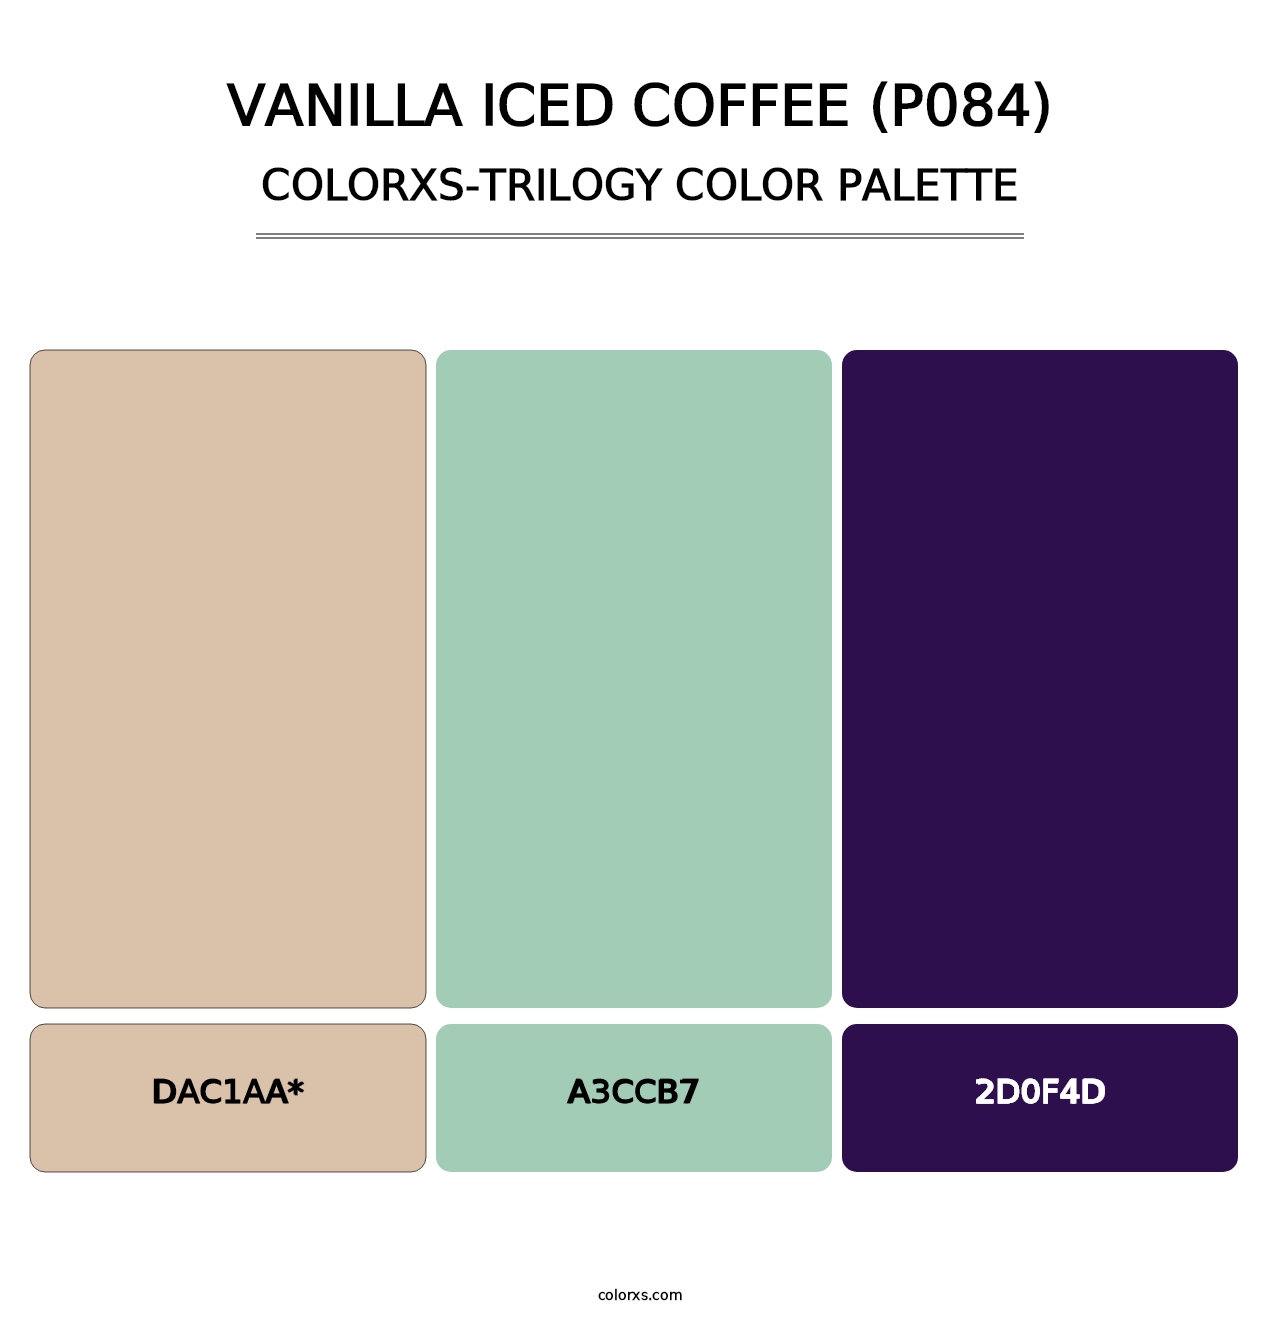 Vanilla Iced Coffee (P084) - Colorxs Trilogy Palette